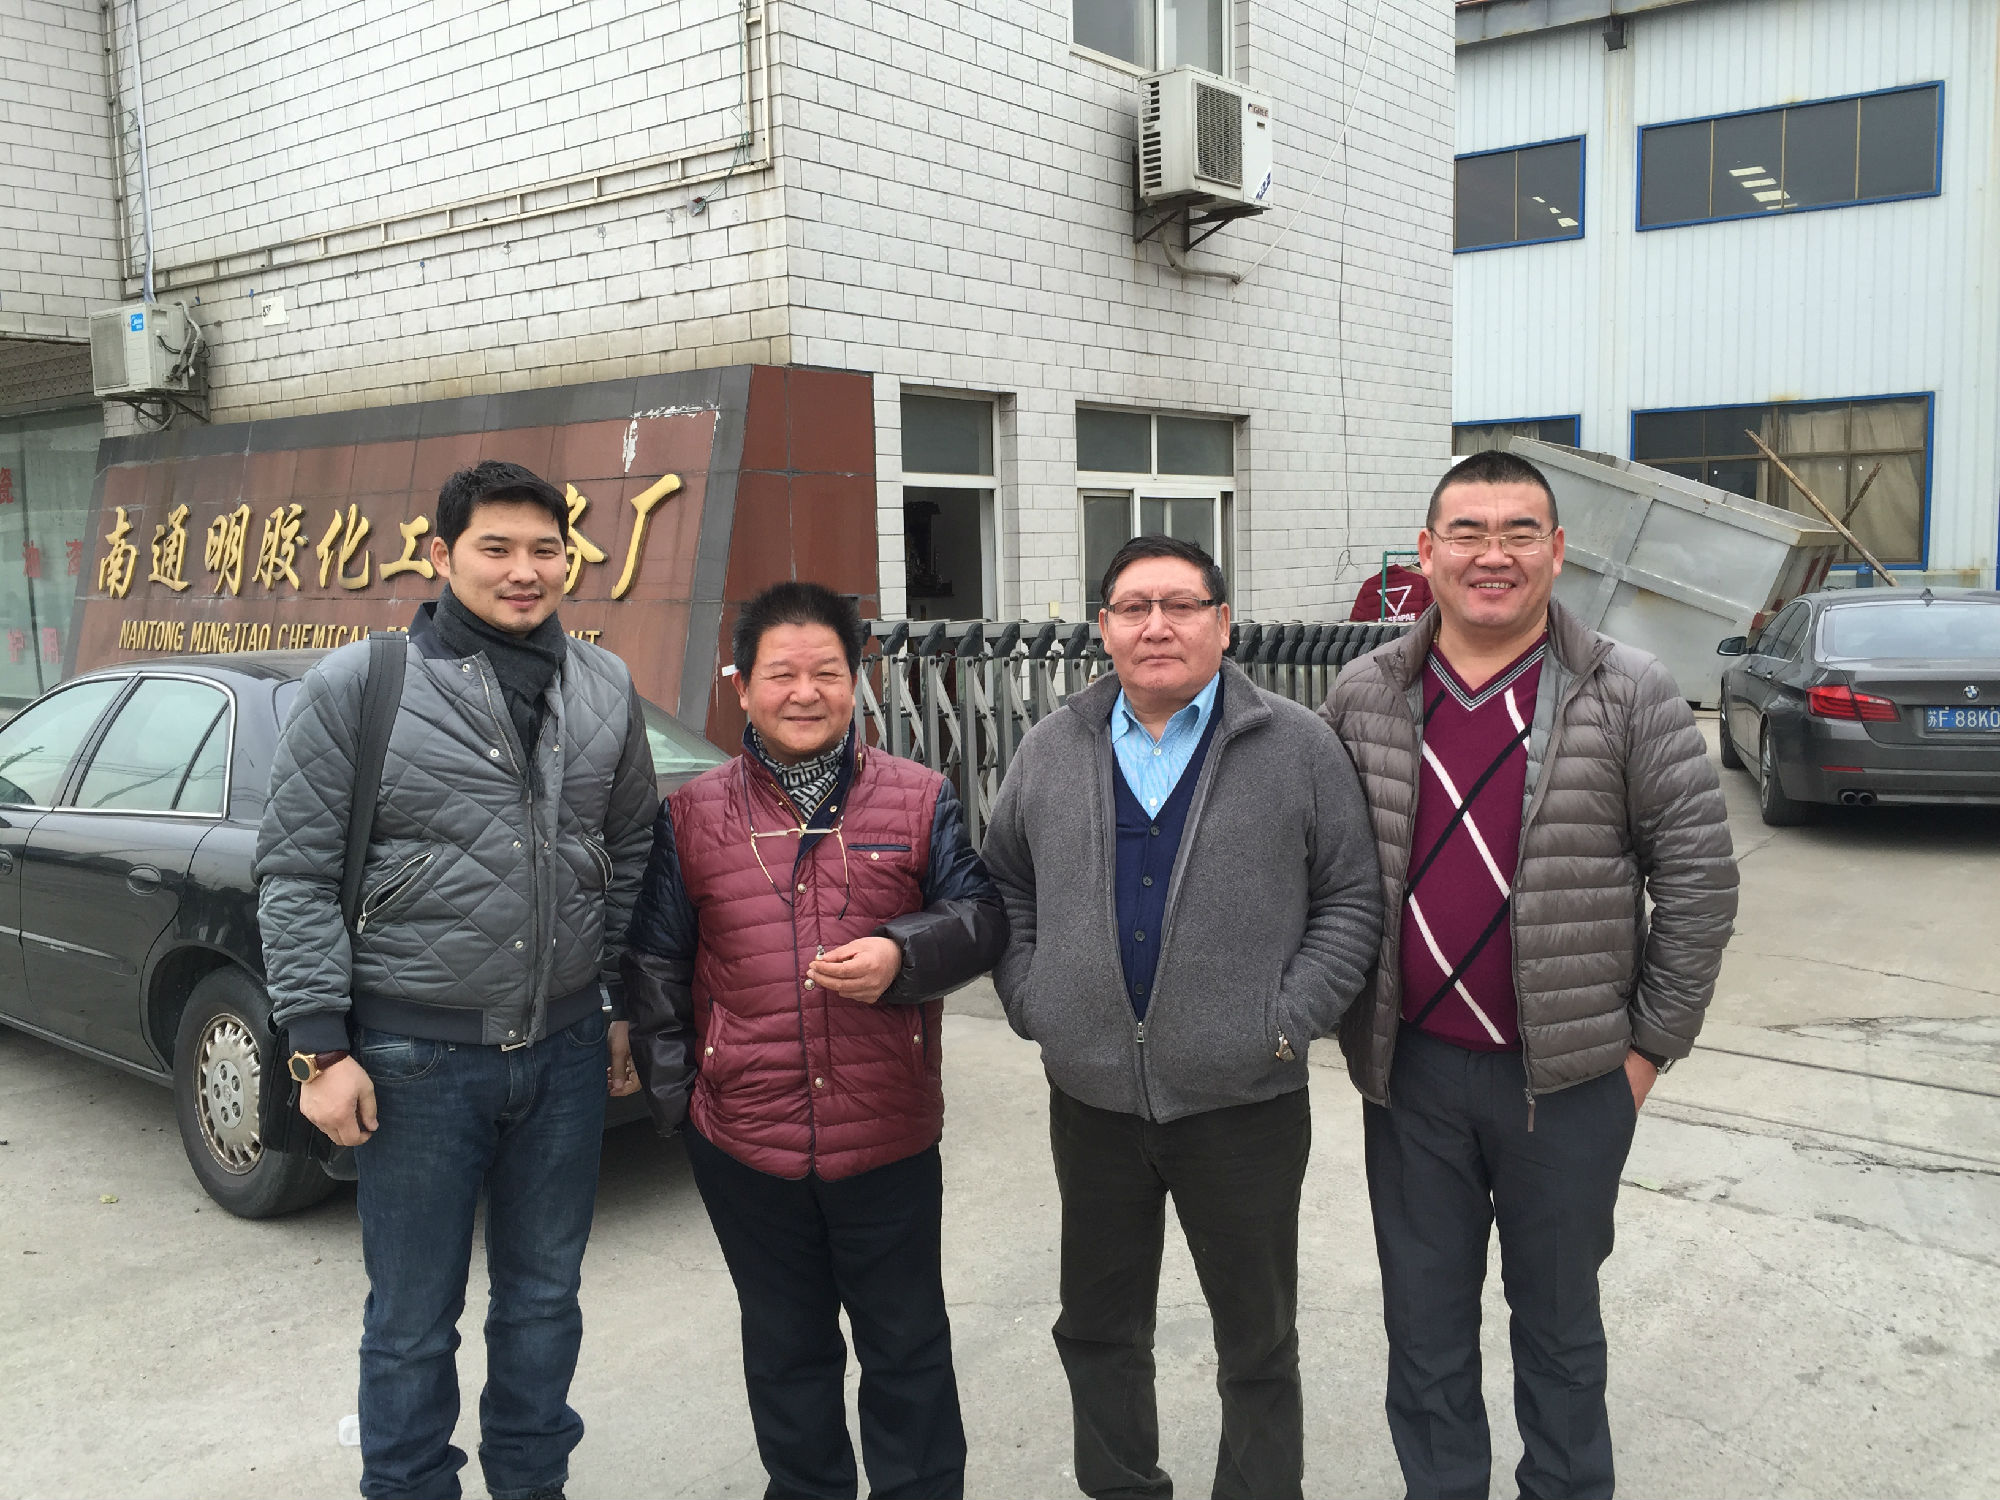 Outside customers to visit our factory and a photo taken wit